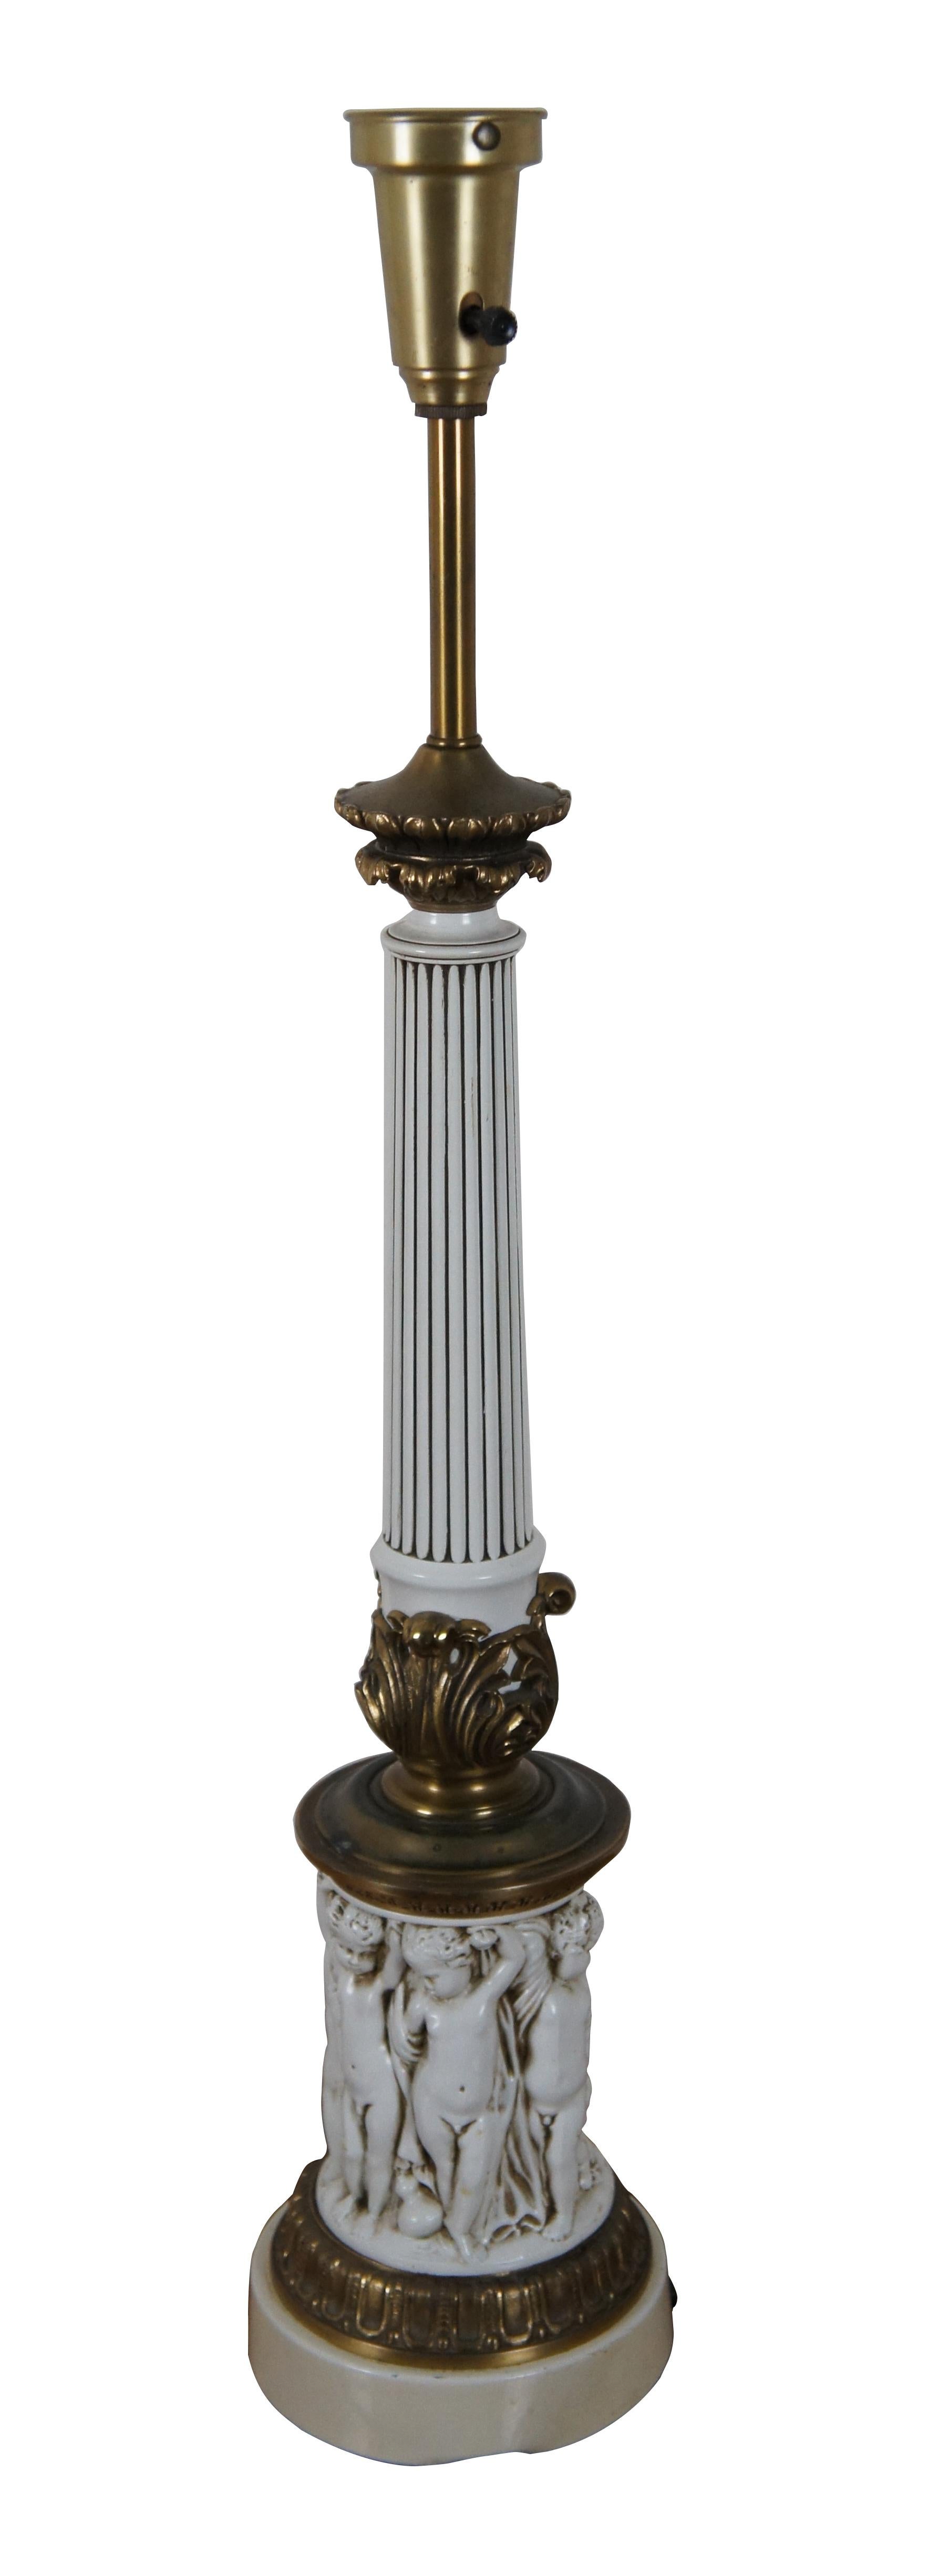 Mid 20th century Hollywood Regency style torchiere style table lamp in brass and white painted resin, in the shape of a Corinthian column with a particularly ornate base featuring a frieze of Putti / cherubs. No shade.